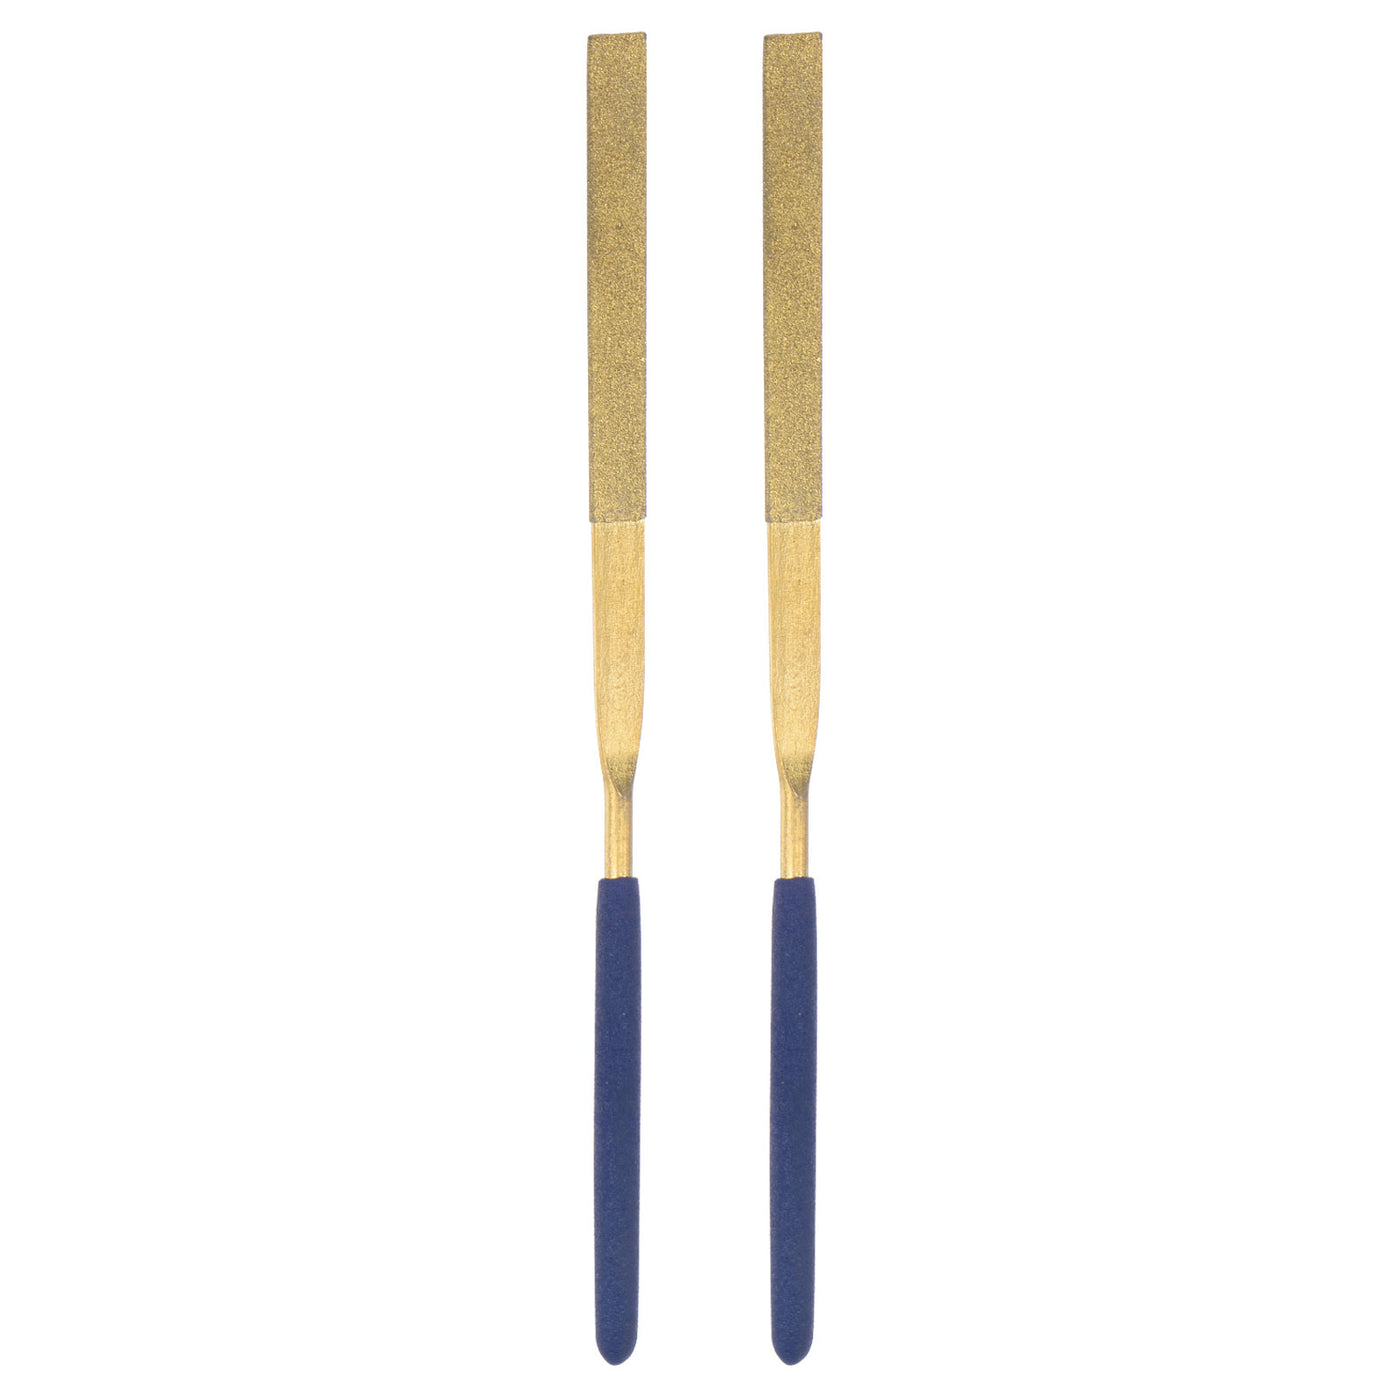 Uxcell Uxcell 3mm x 140mm Titanium Coated Flat Diamond Needle Files with TPU Handle 2pcs